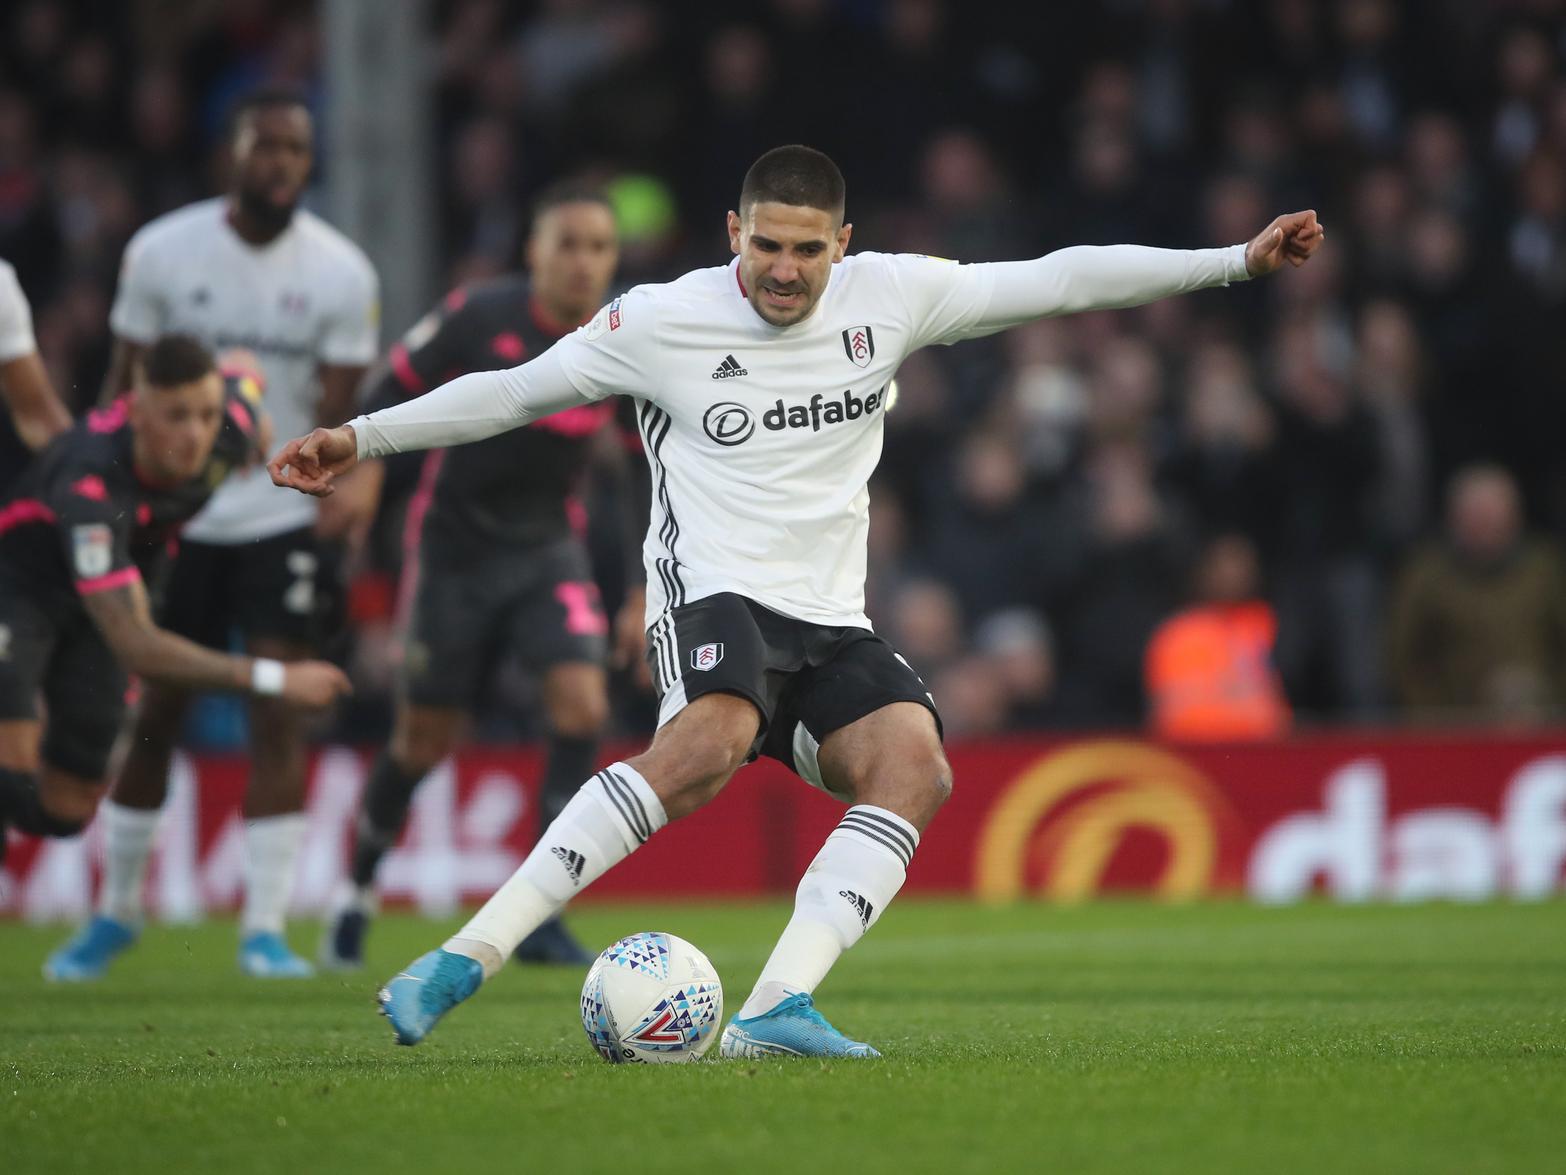 Fulham's hopes of achieving promotion this season have taken a massive blow, with their star striker Aleksander Mitrovic ruled out for up to three weeks with a ligament injury. (Sky Sports)